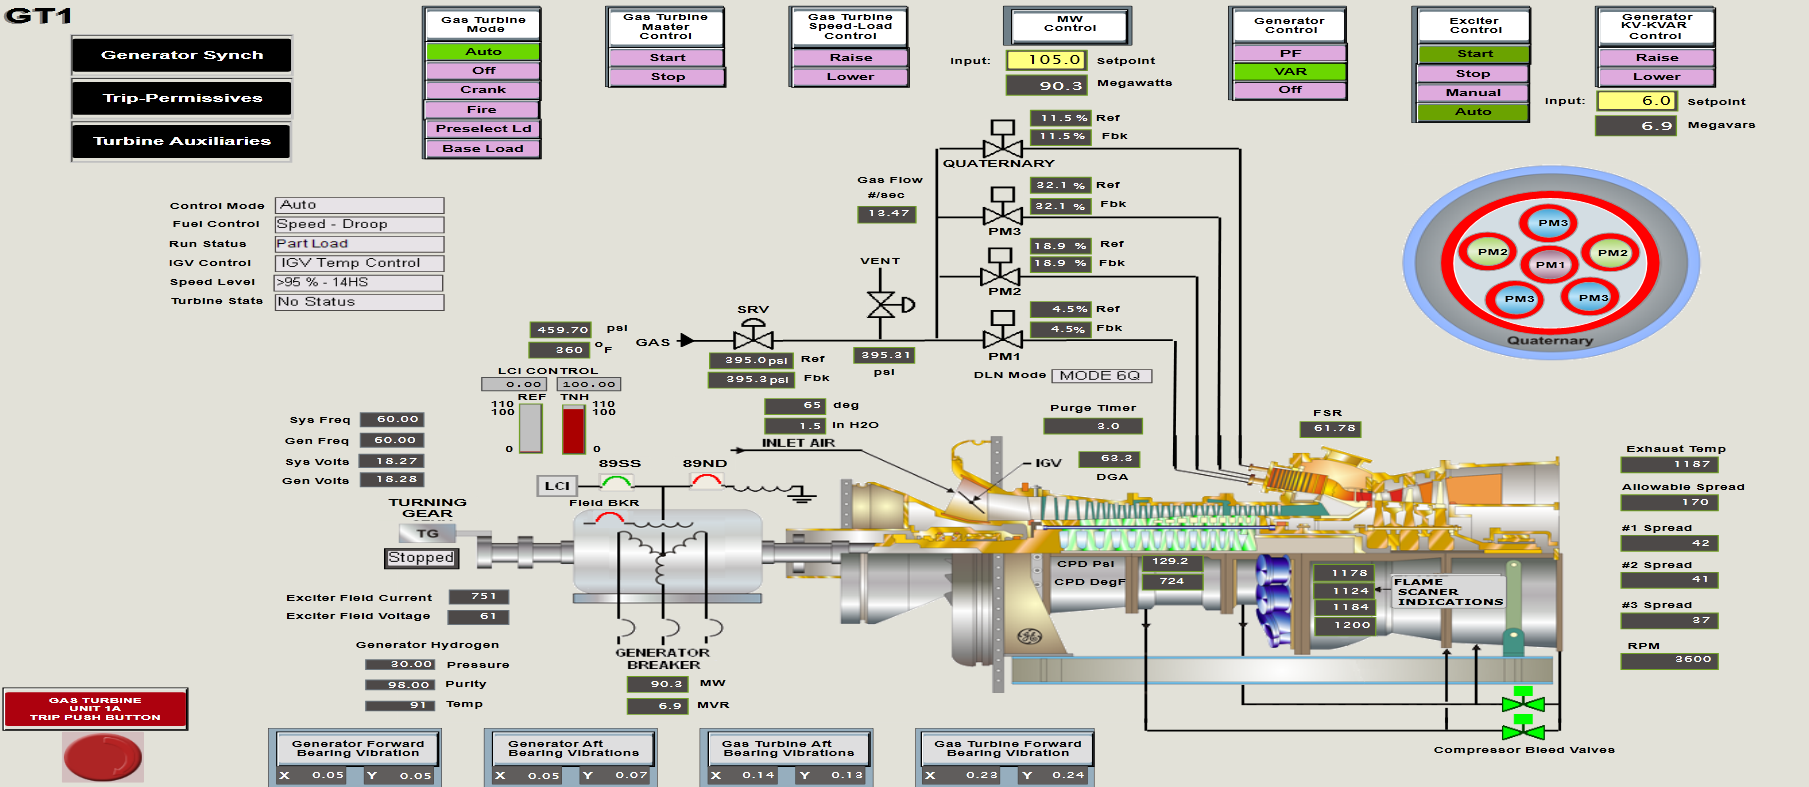 Combined Cycle Simulator